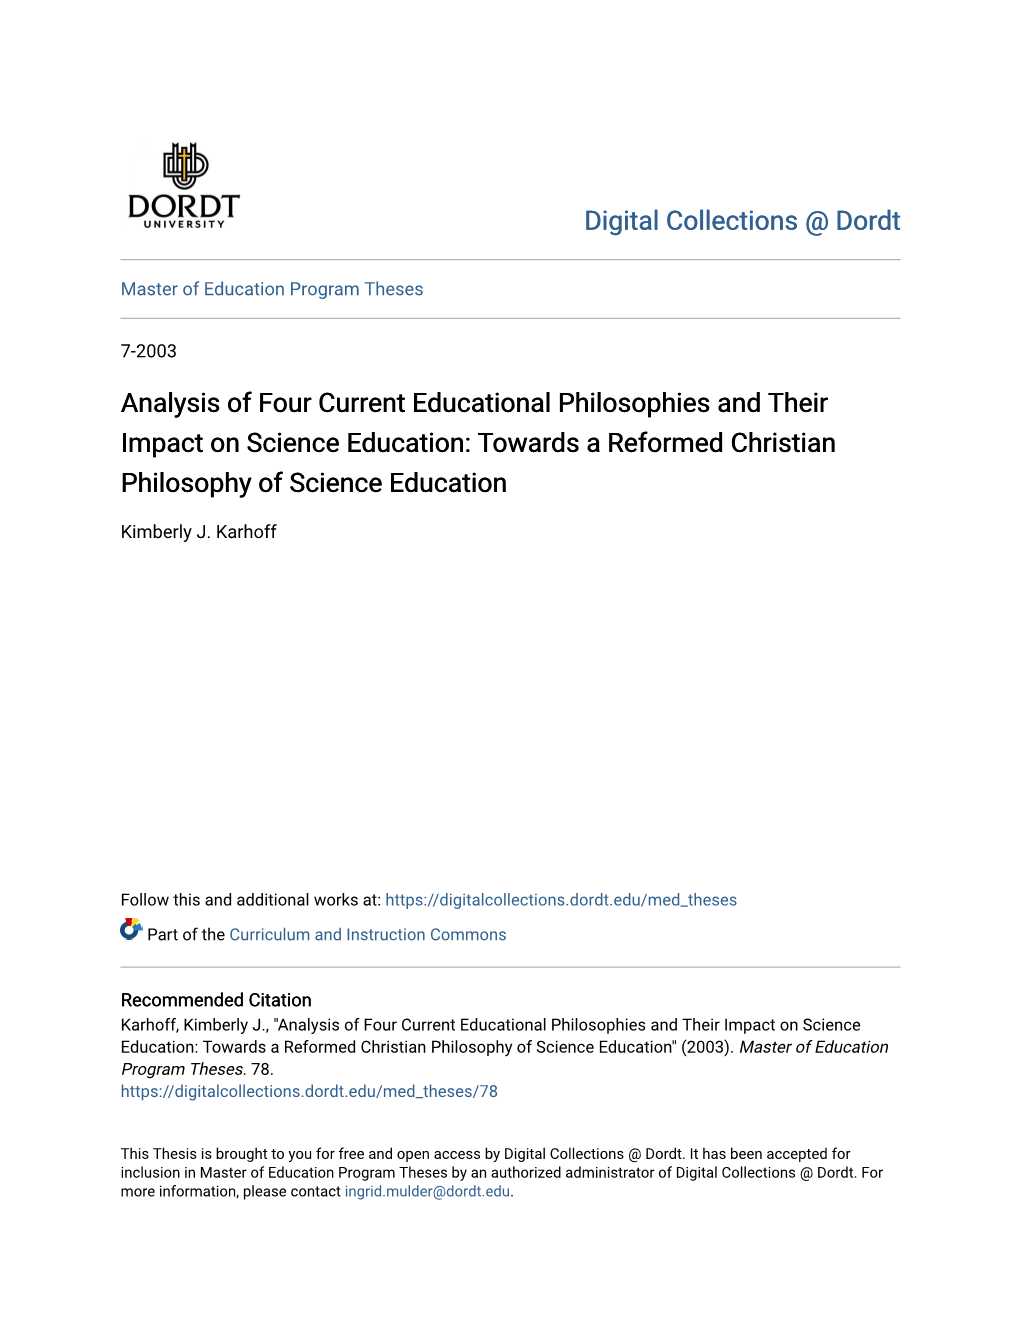 Analysis of Four Current Educational Philosophies and Their Impact on Science Education: Towards a Reformed Christian Philosophy of Science Education